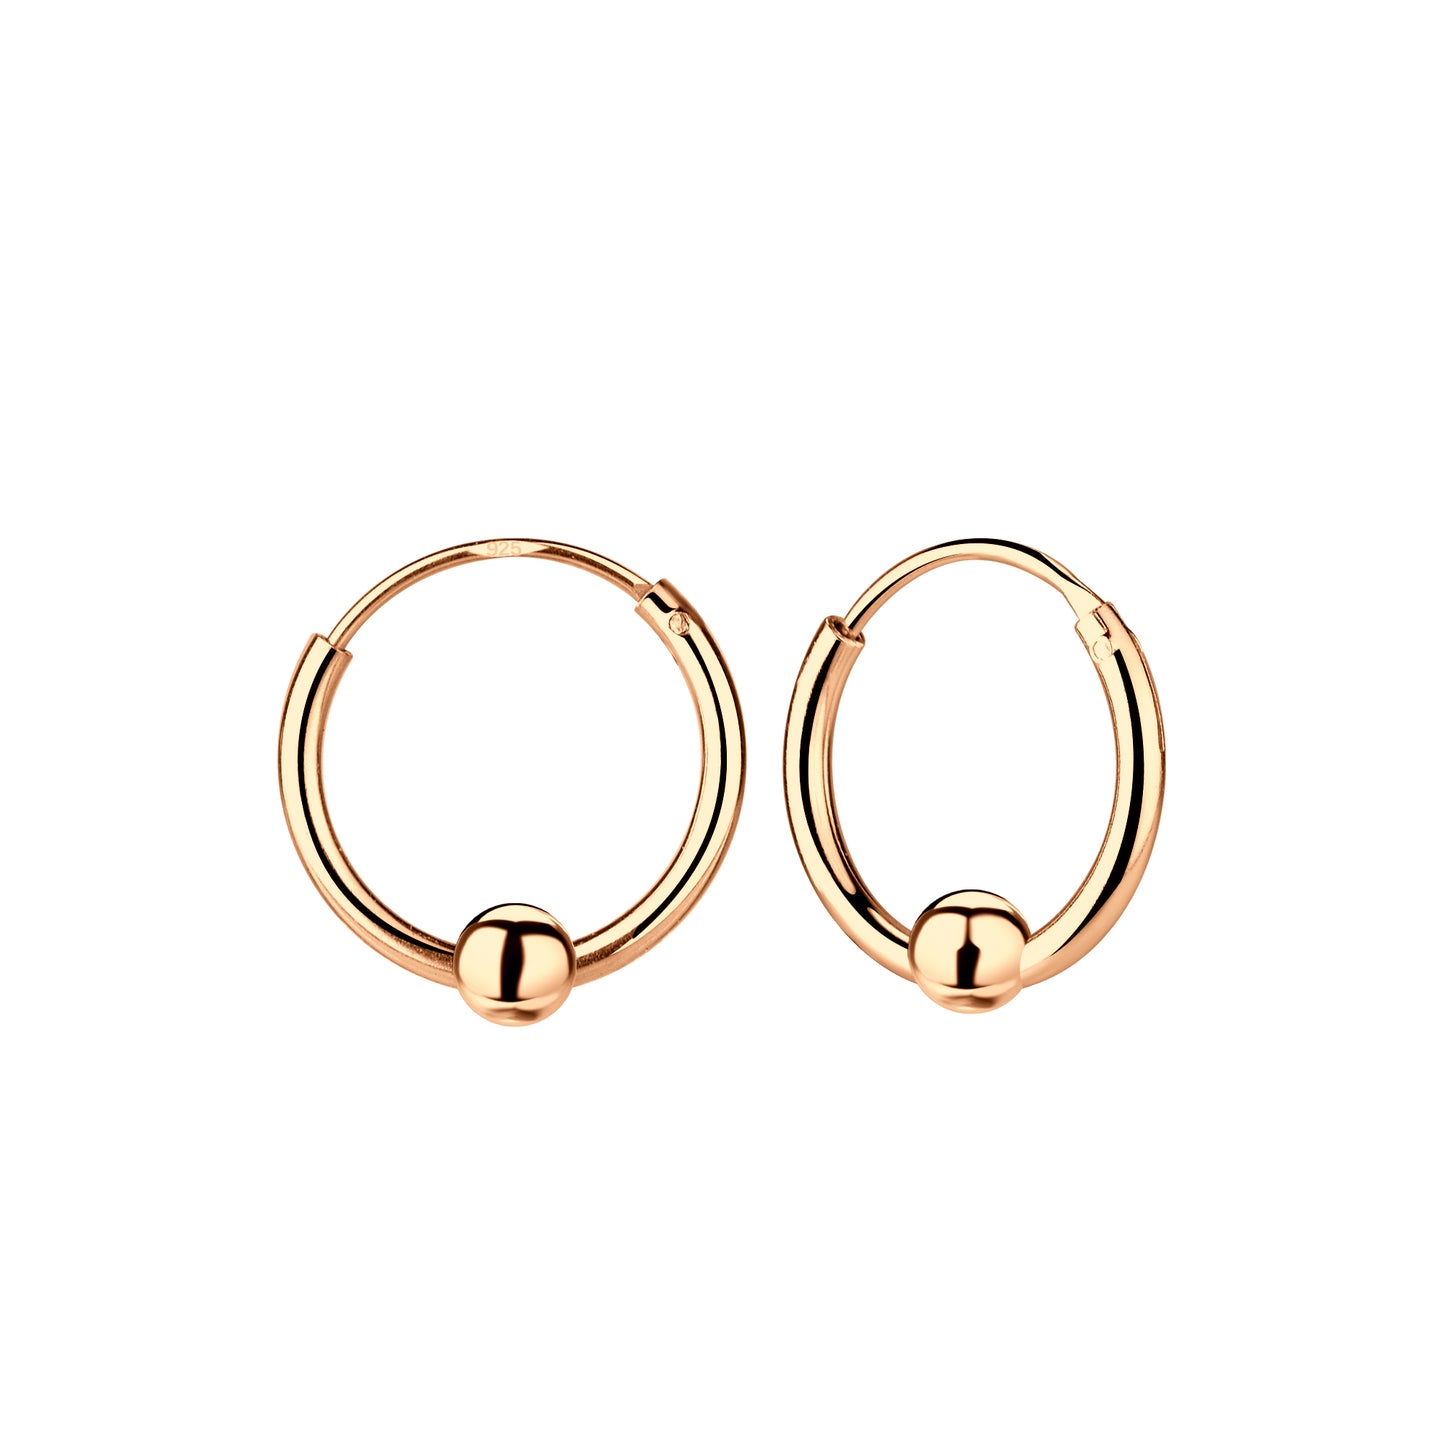 14ct Gold Plated Sterling Silver Ball Hoop Earrings